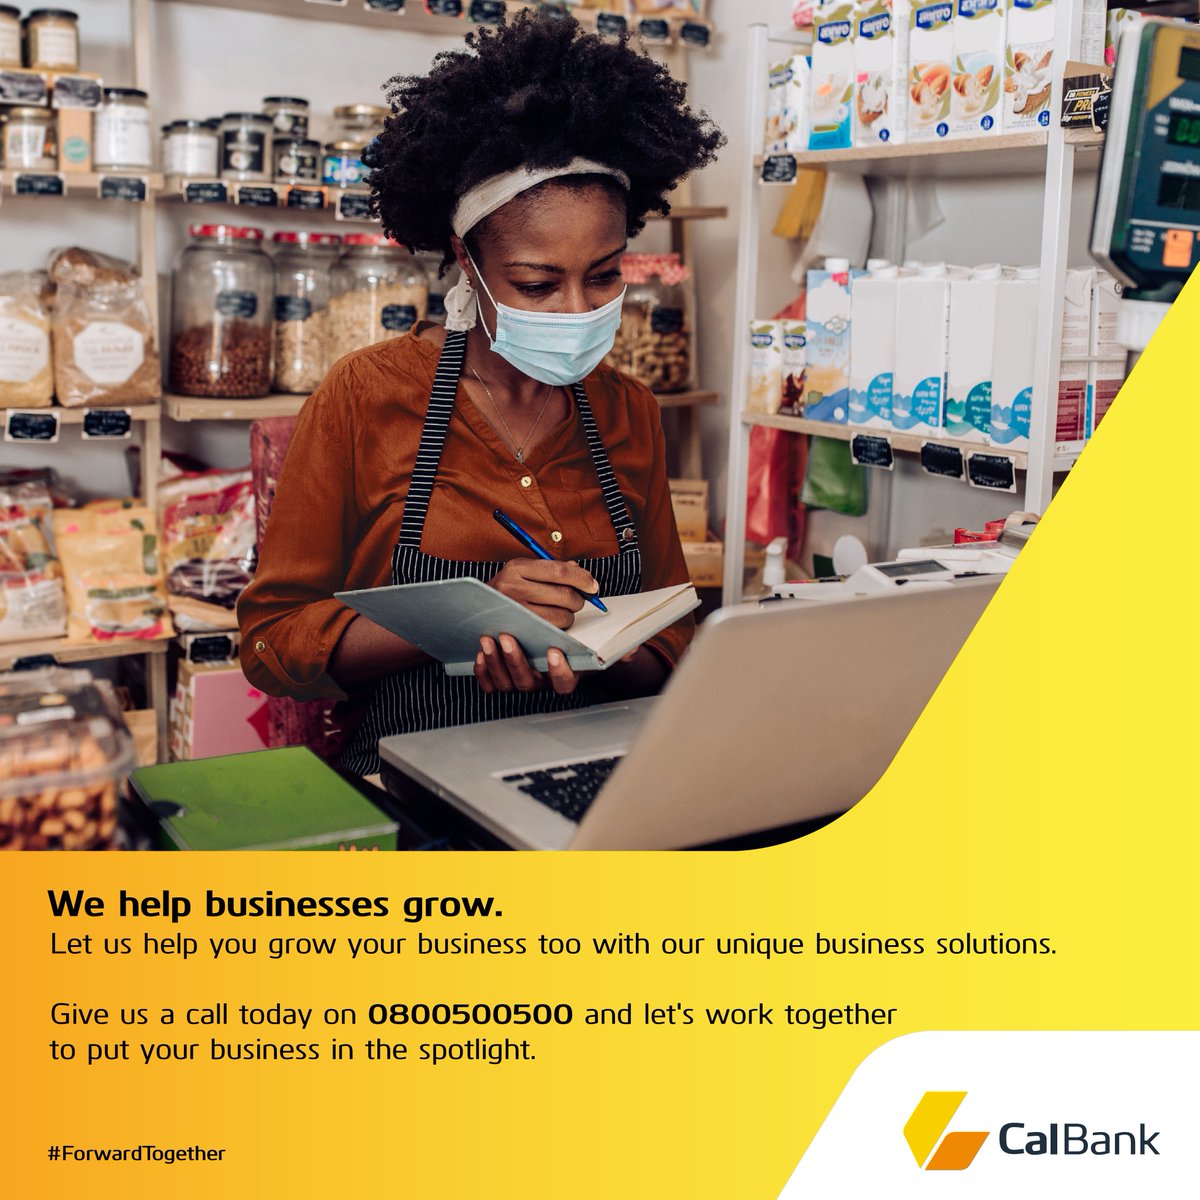 Get personalized financial guidance and support for your business with our SME Banking solutions. Send us a message or walk into any of our branches nationwide and let's work together to put your business in the spotlight.

#CalBank #ForwardTogether #SME #ghanaianbusinesses…